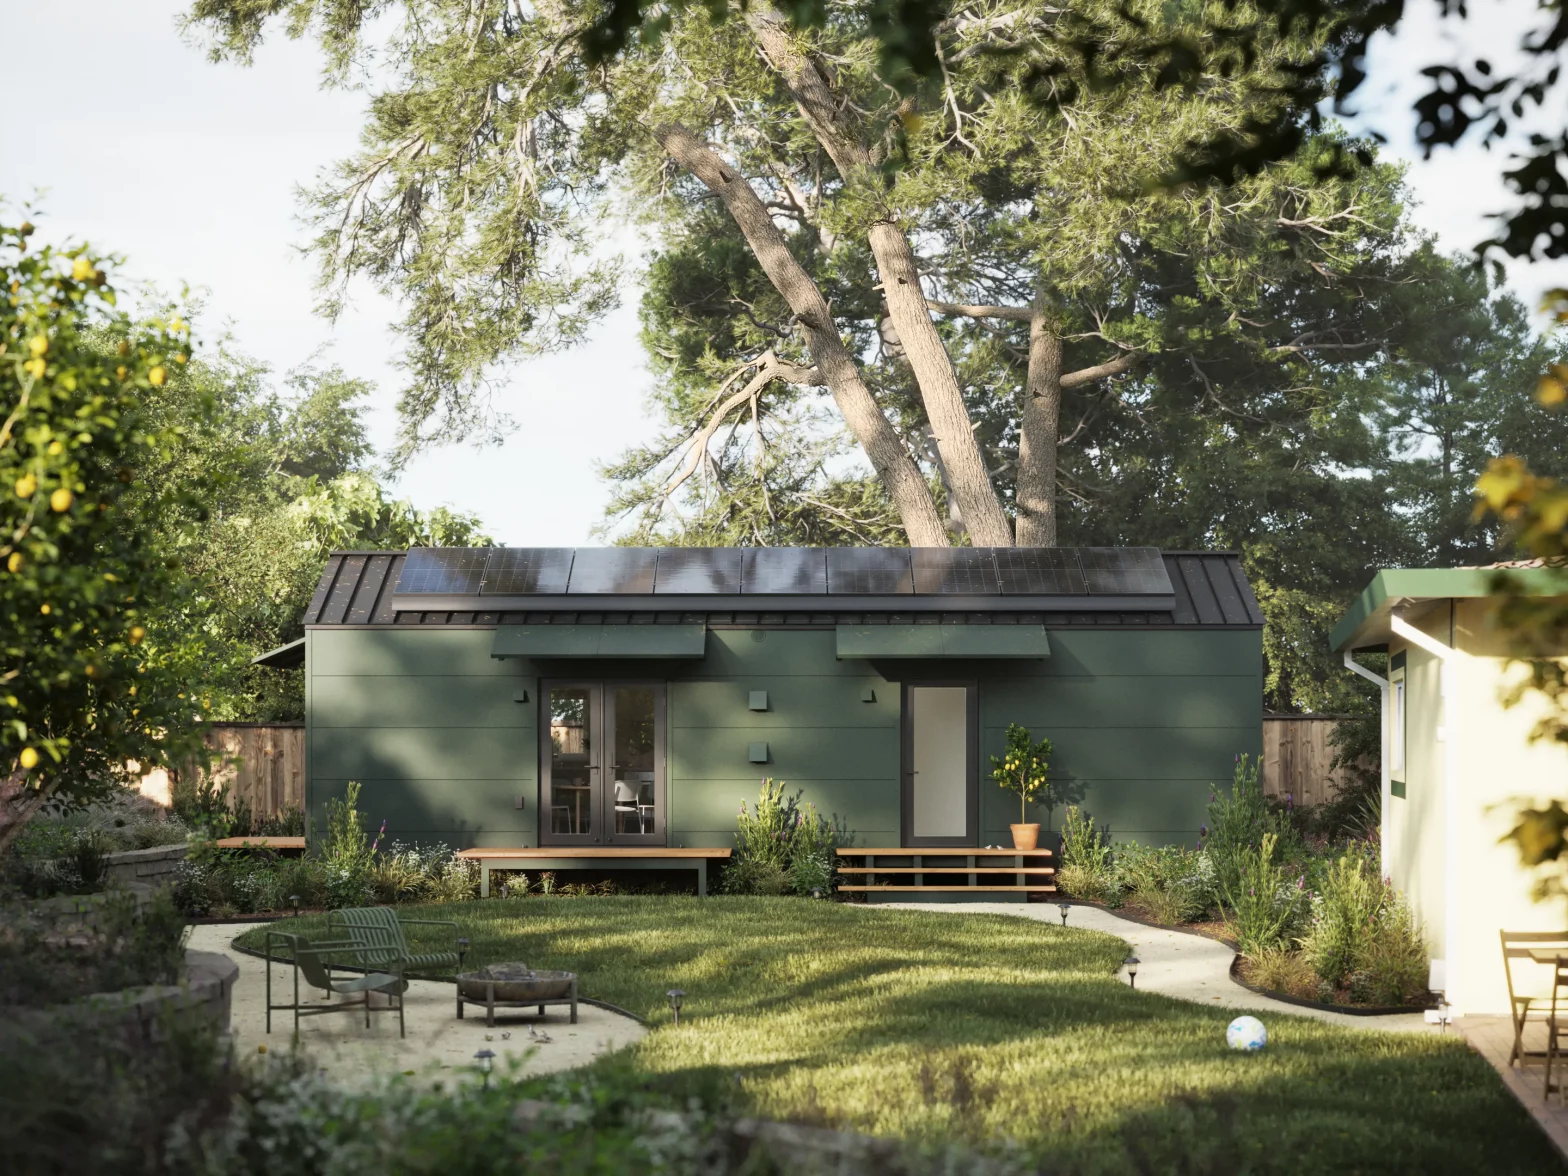 AirBnB Co-Founder Starts Tiny House Business For Homeowners